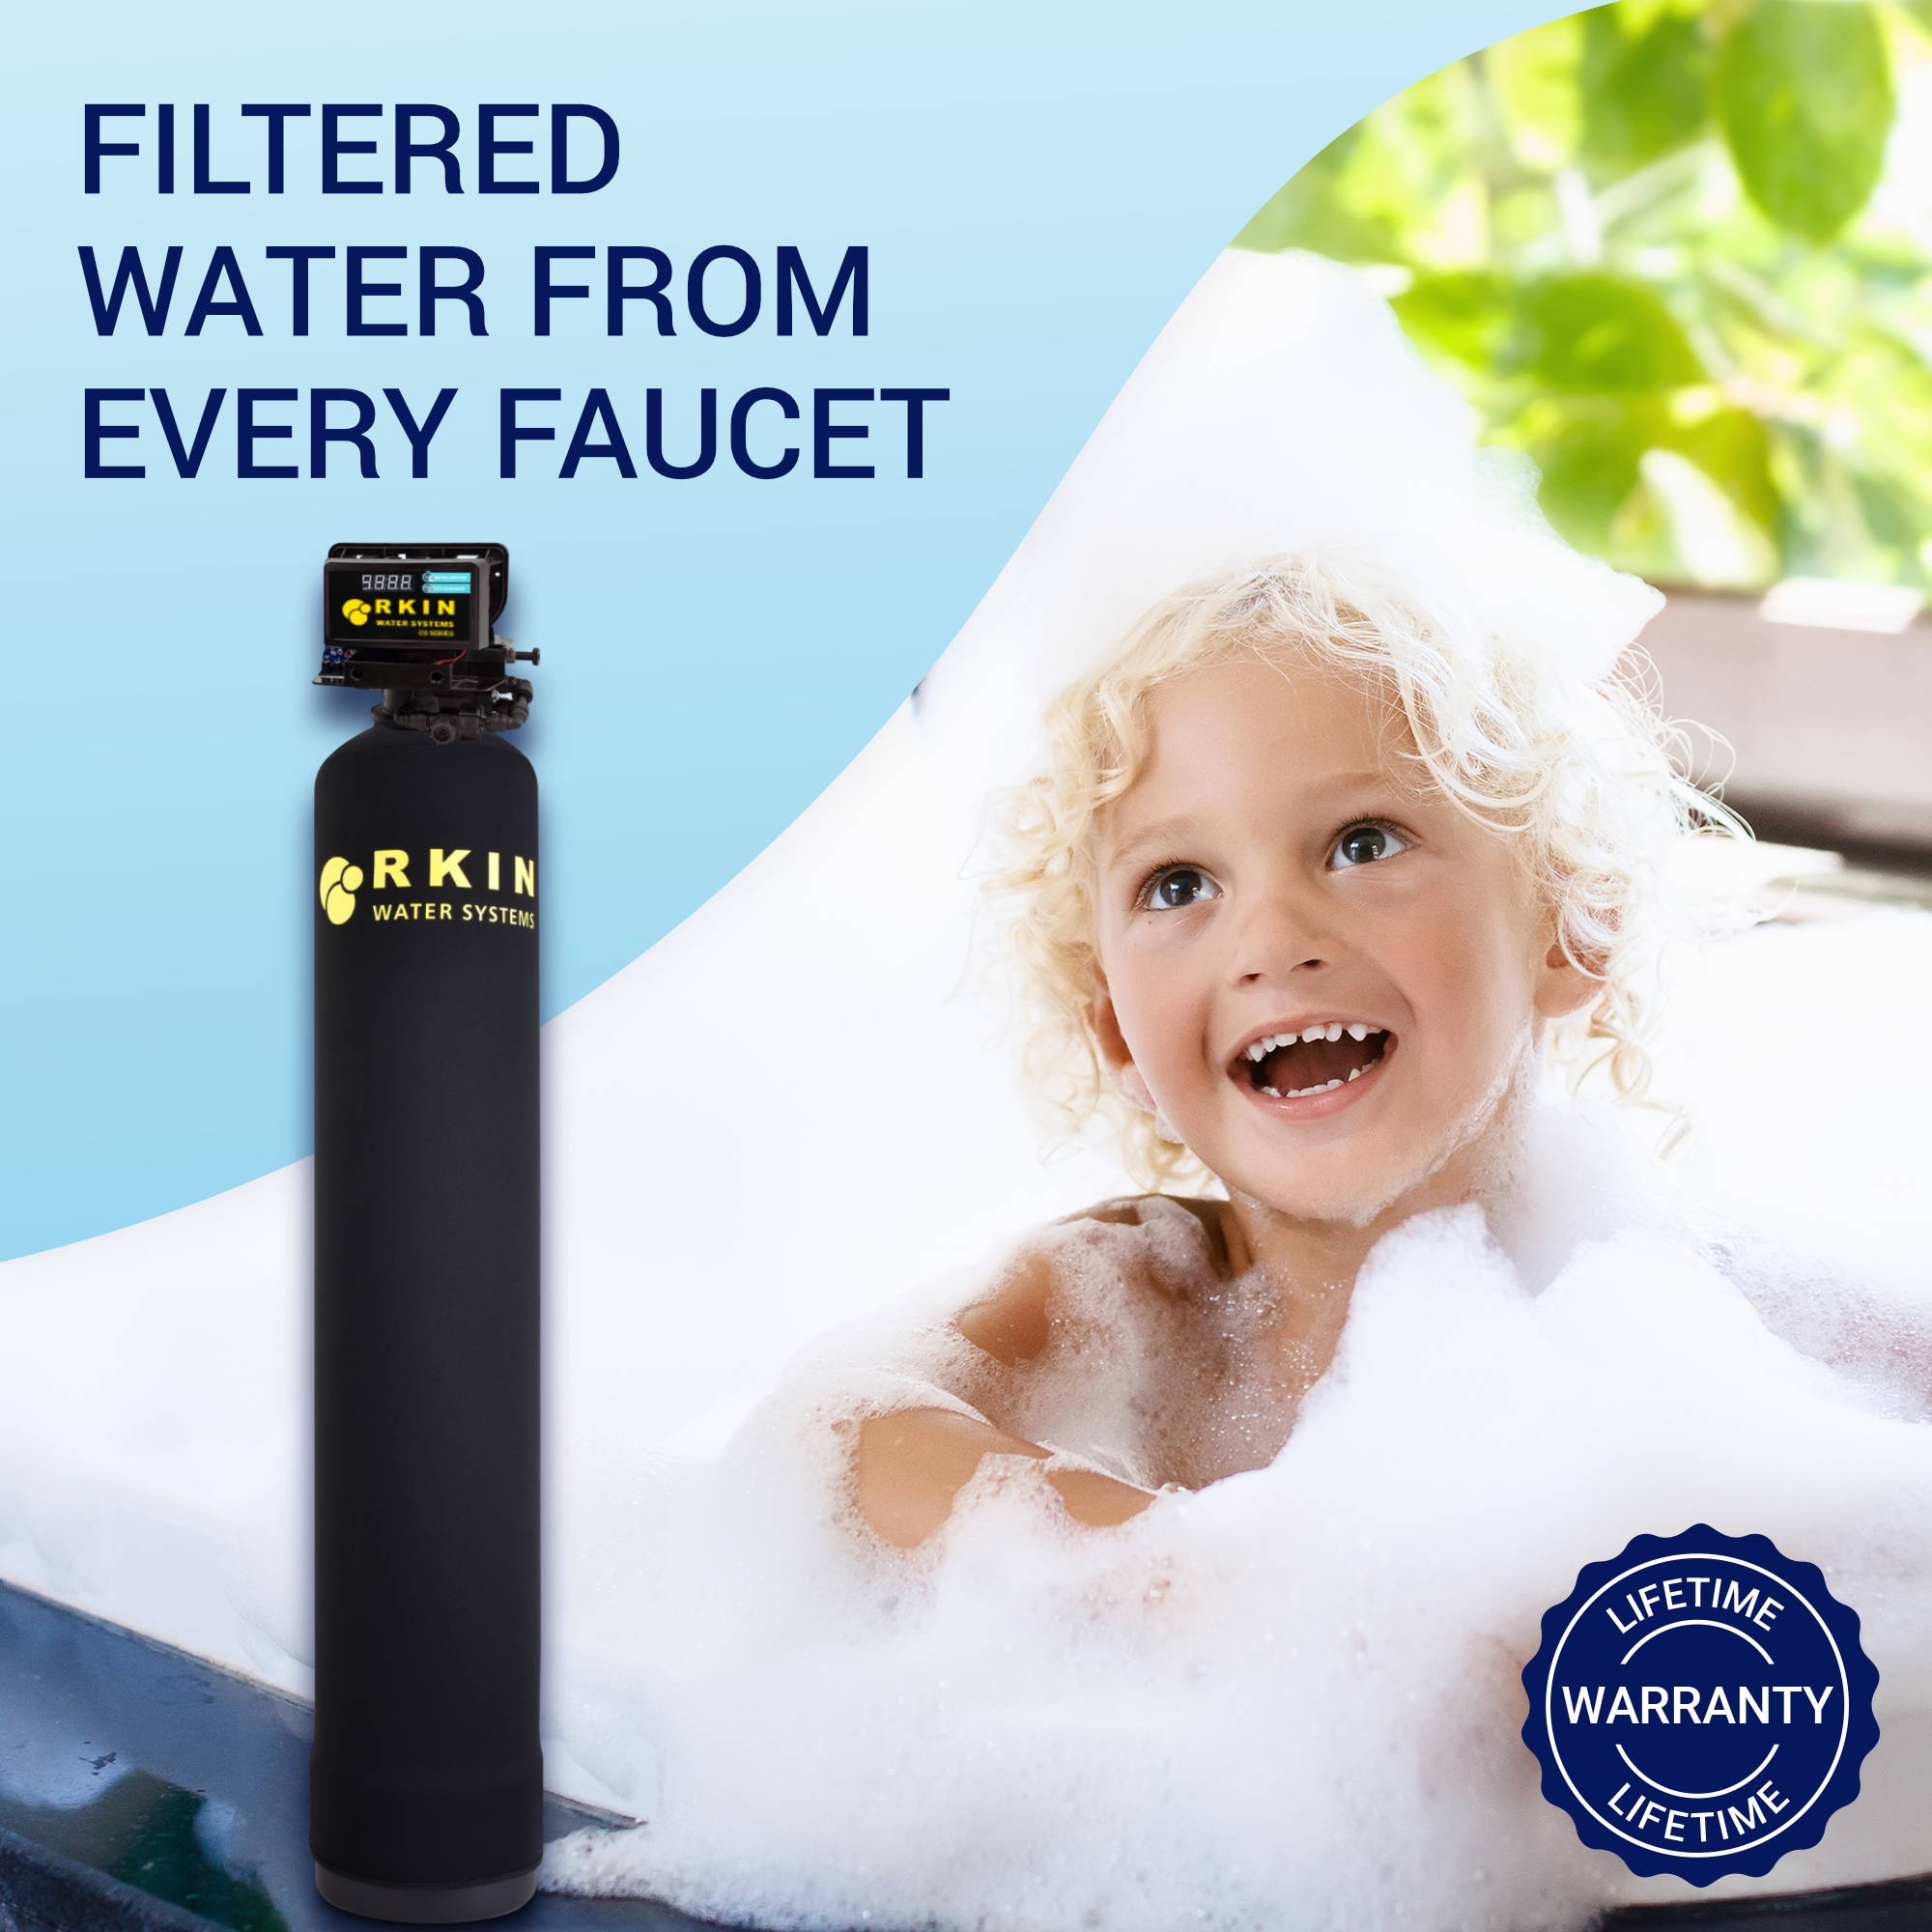 Iron and Sulfur Water Filter by RKIN